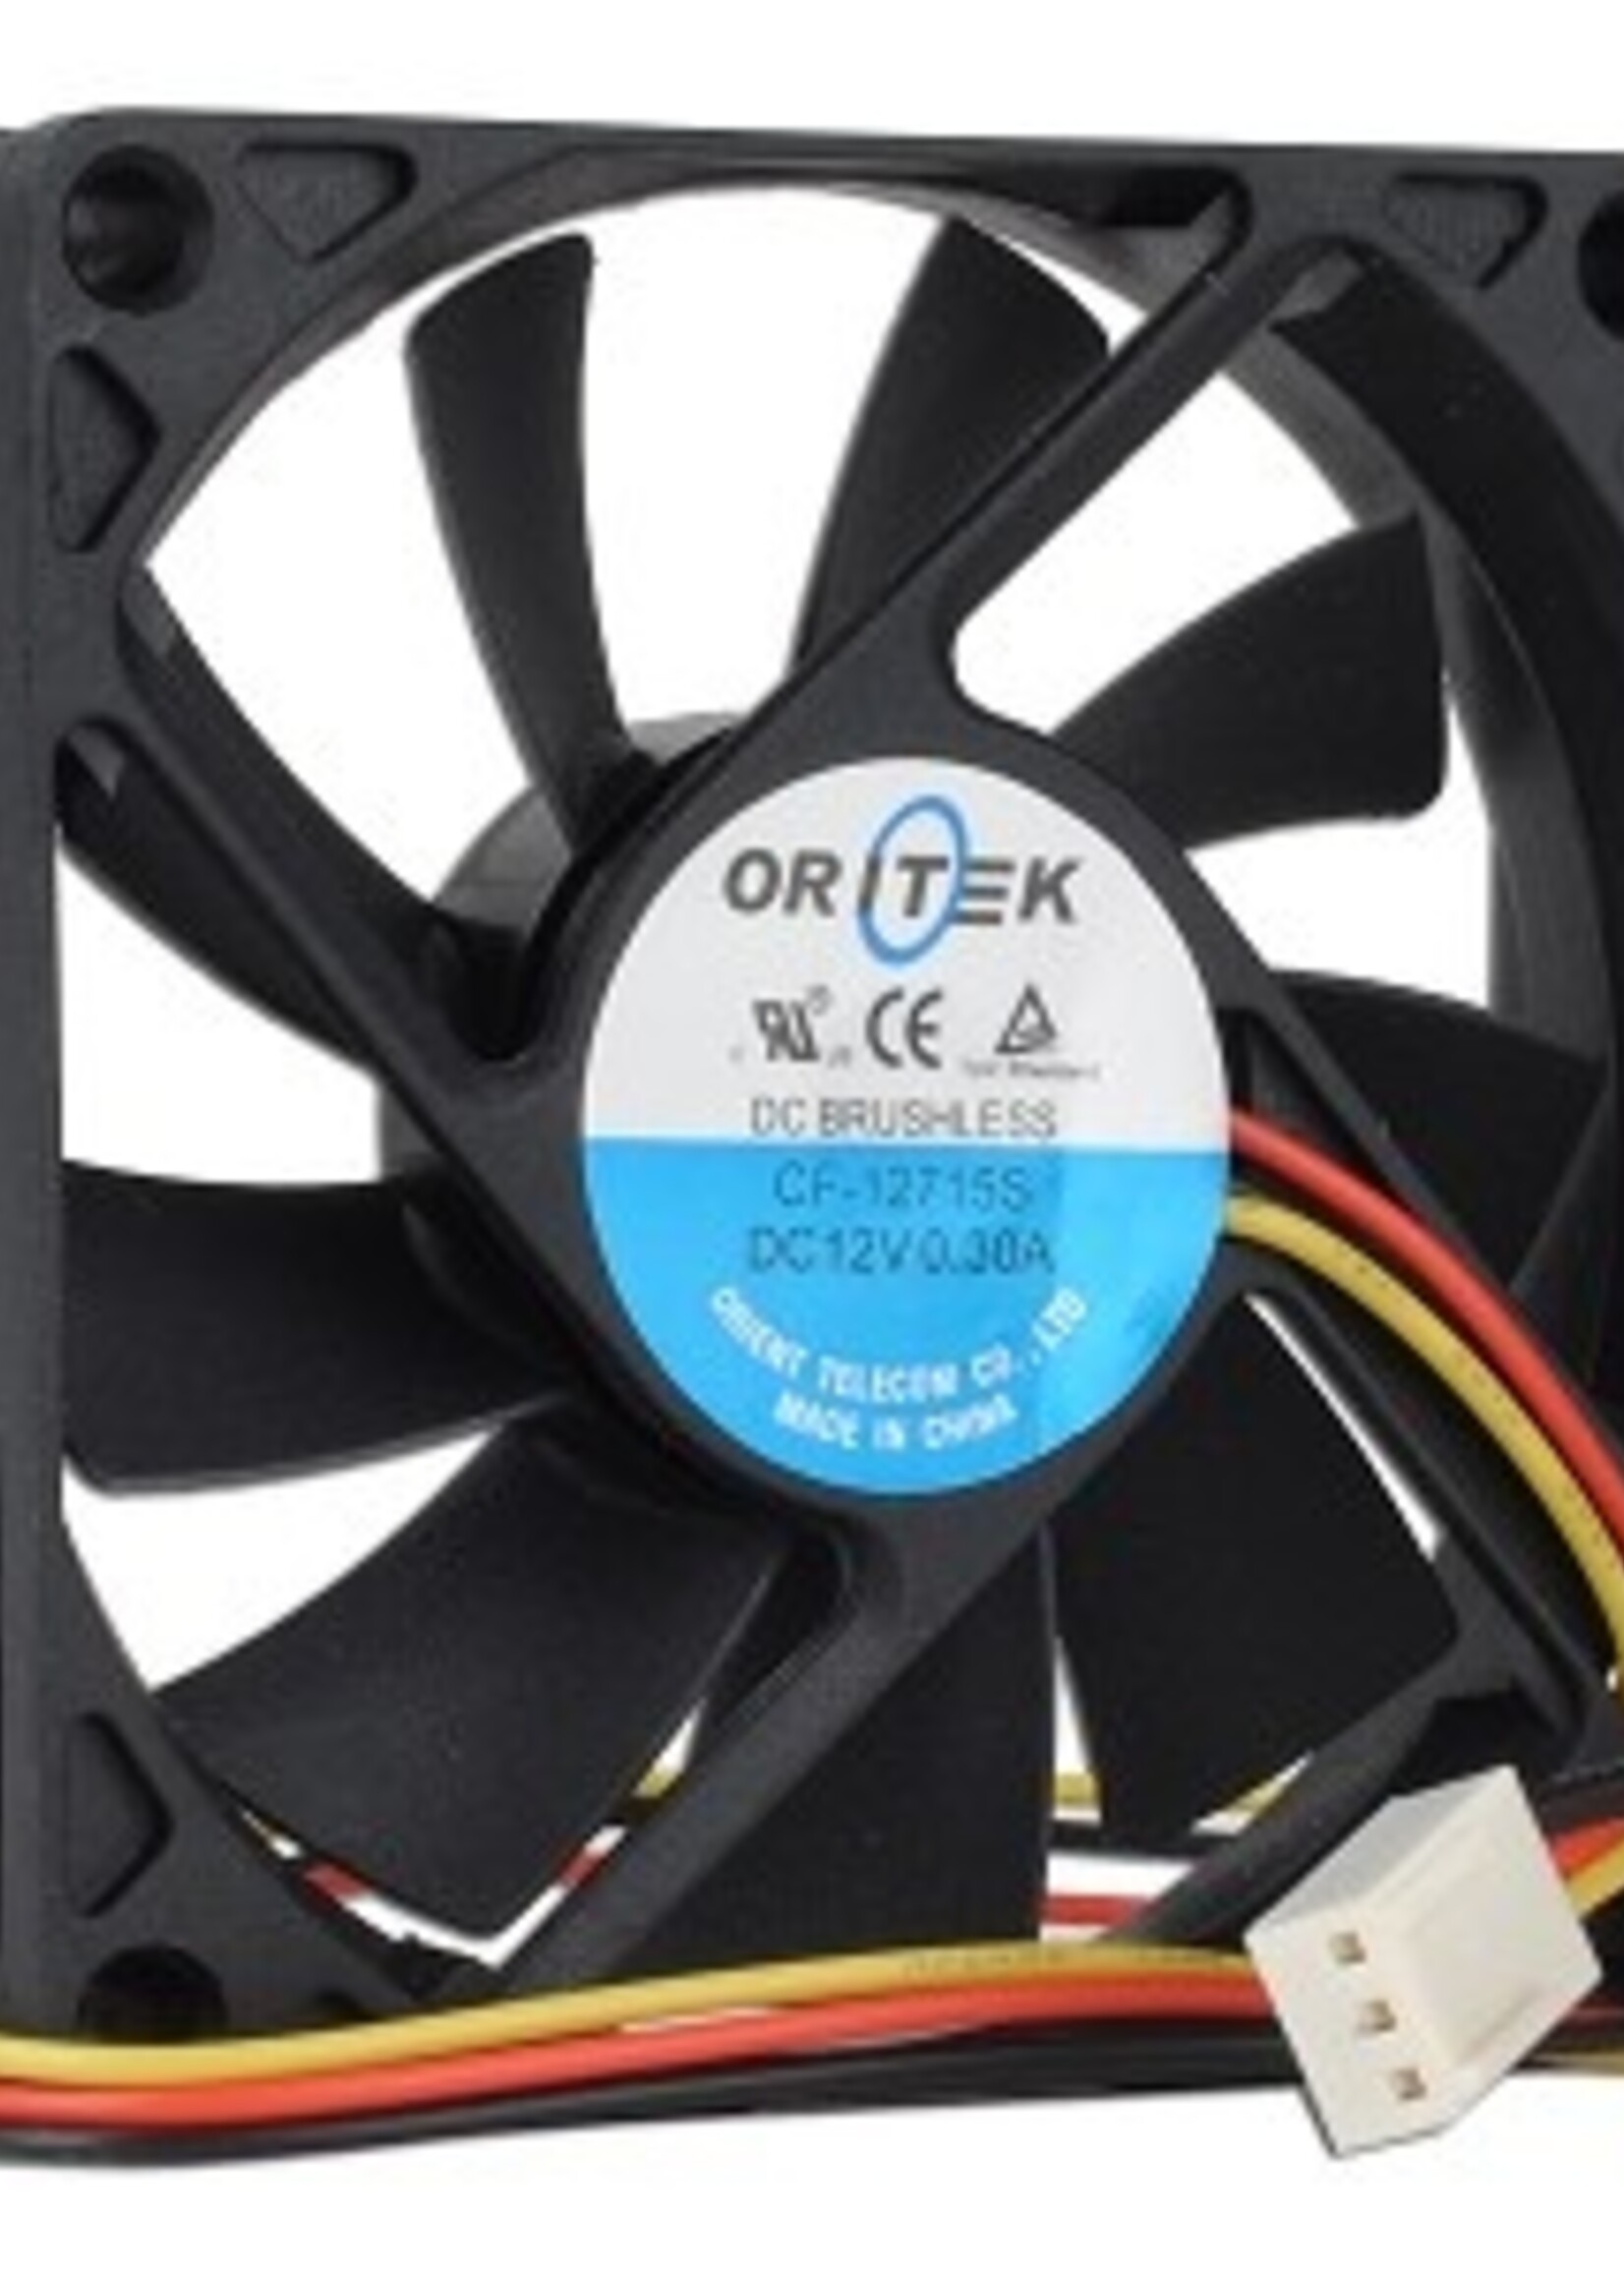 EVERCASE 70MM FAN 15 MM THICK FOR 1290 EV077S3